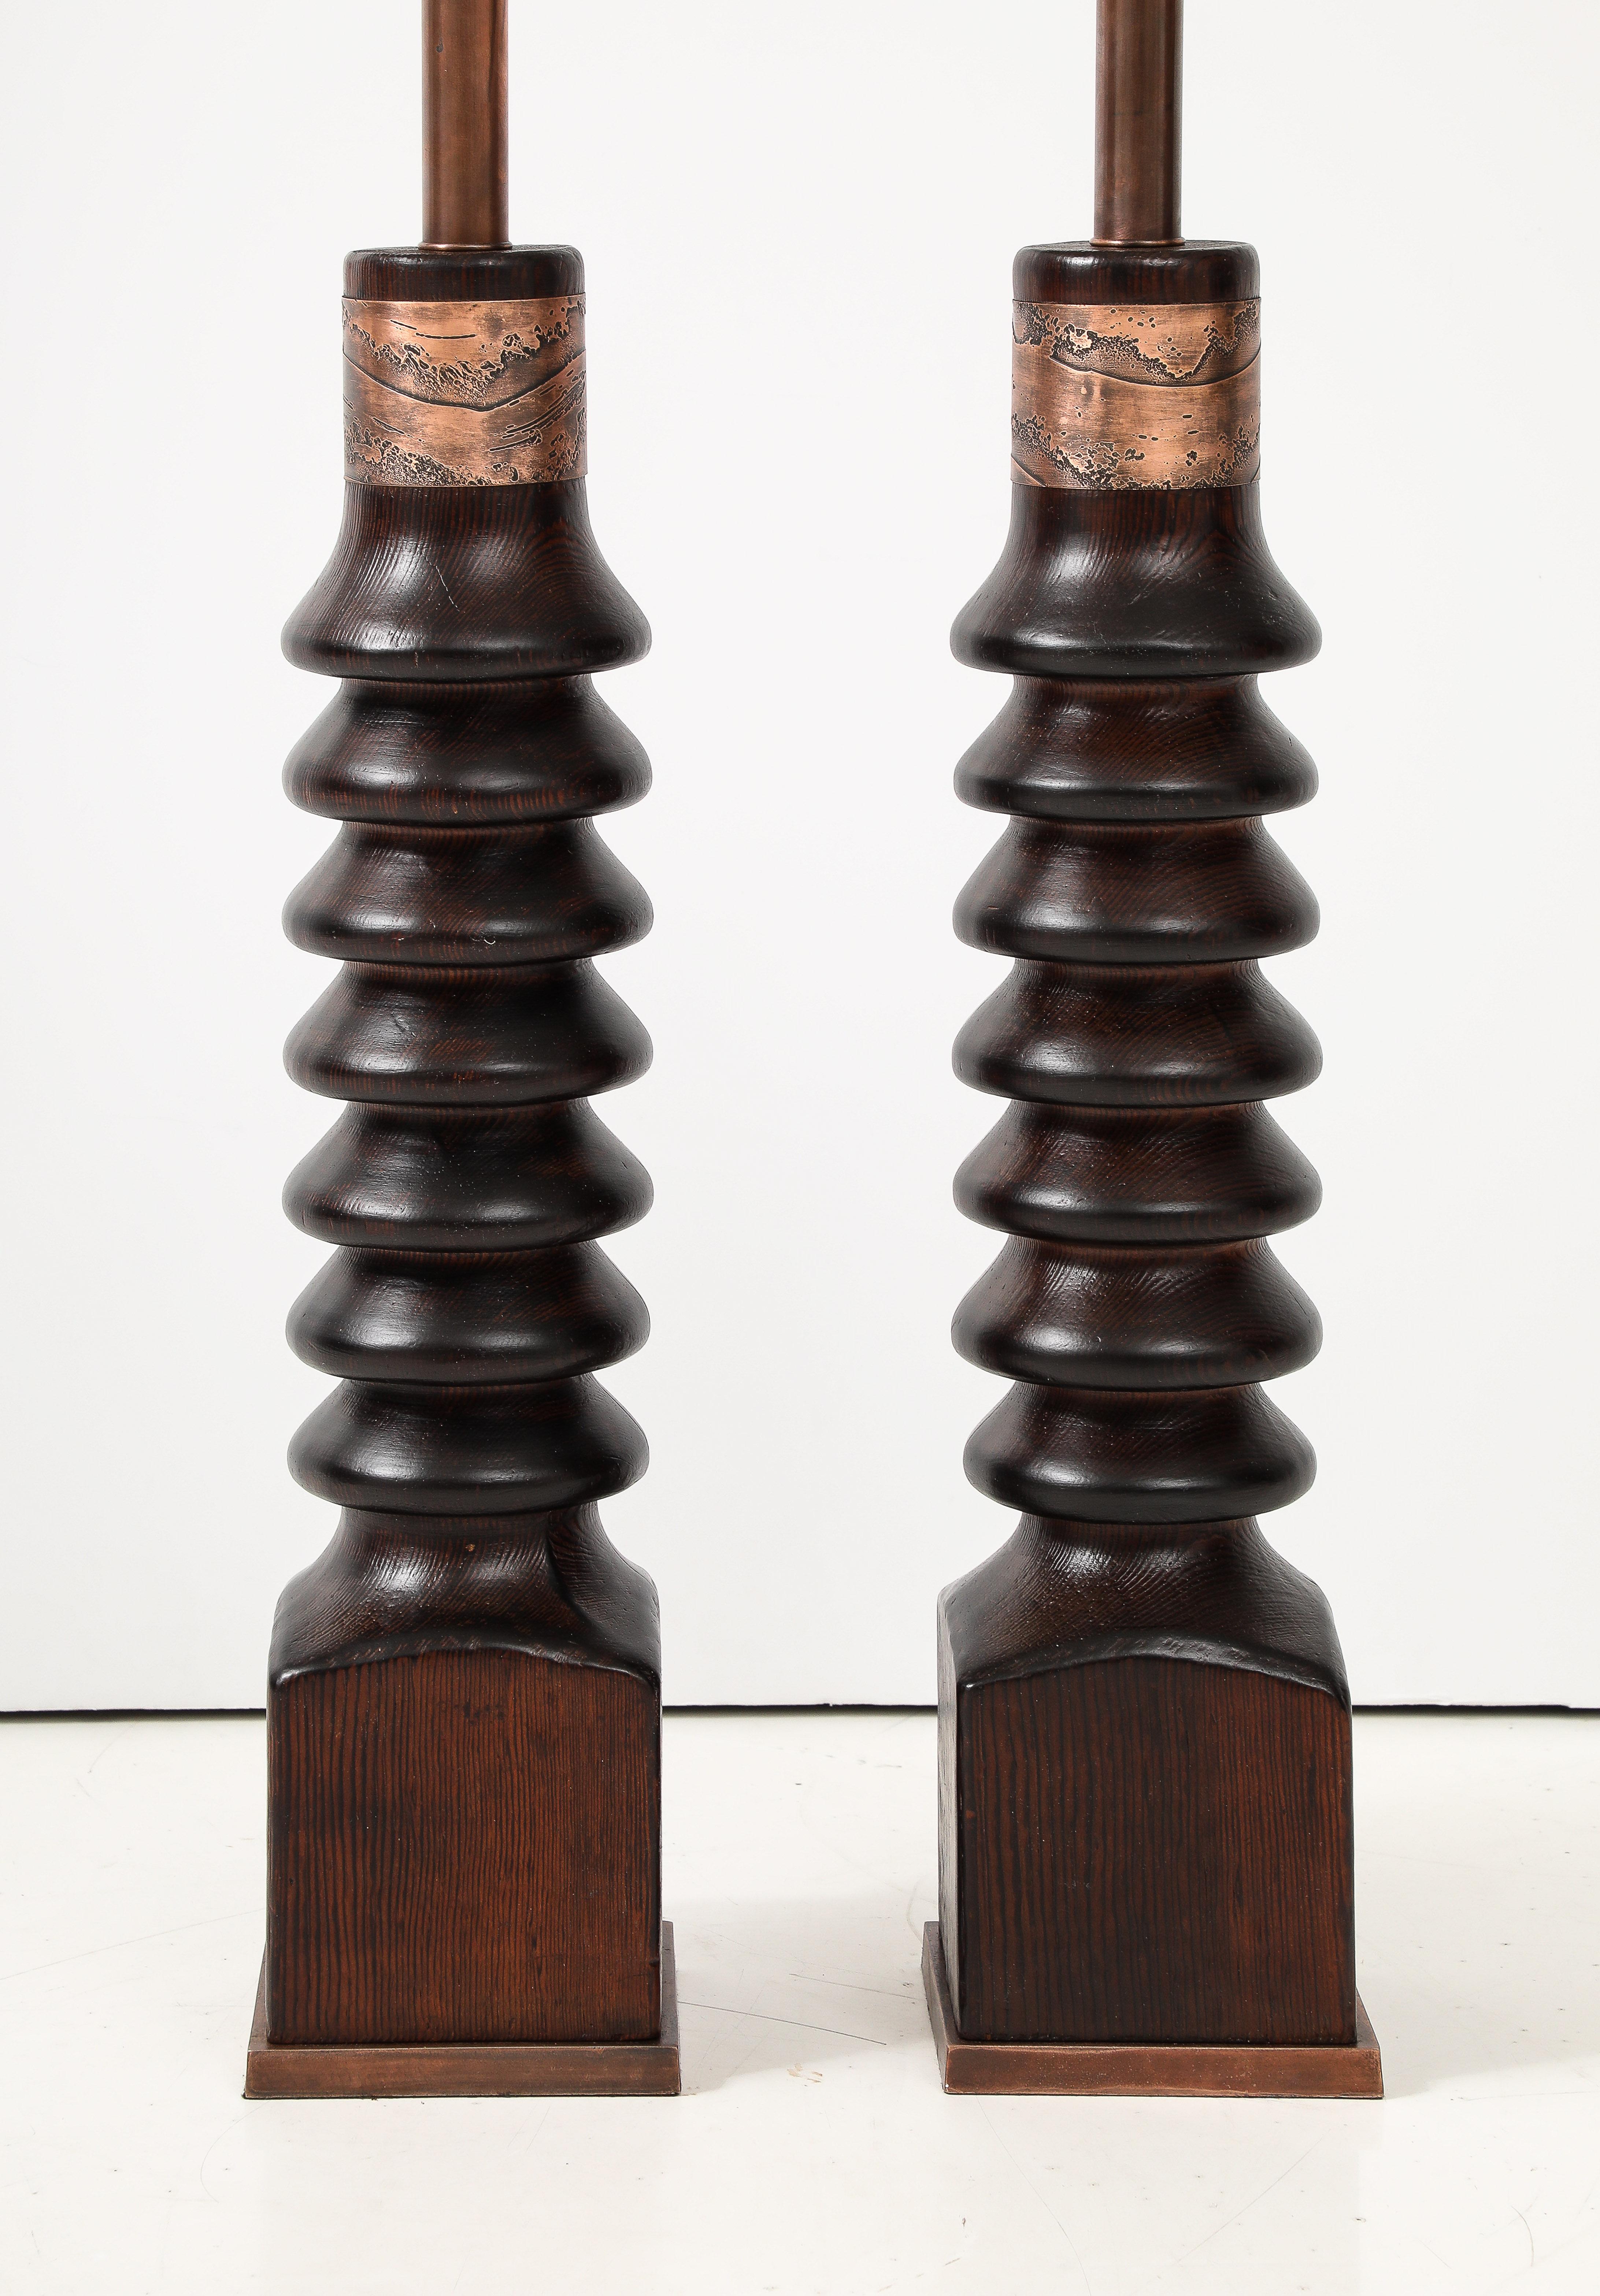 1960's Mid-Century Modern Tall Laurel Oak And Copper Table Lamps (Mitte des 20. Jahrhunderts) im Angebot